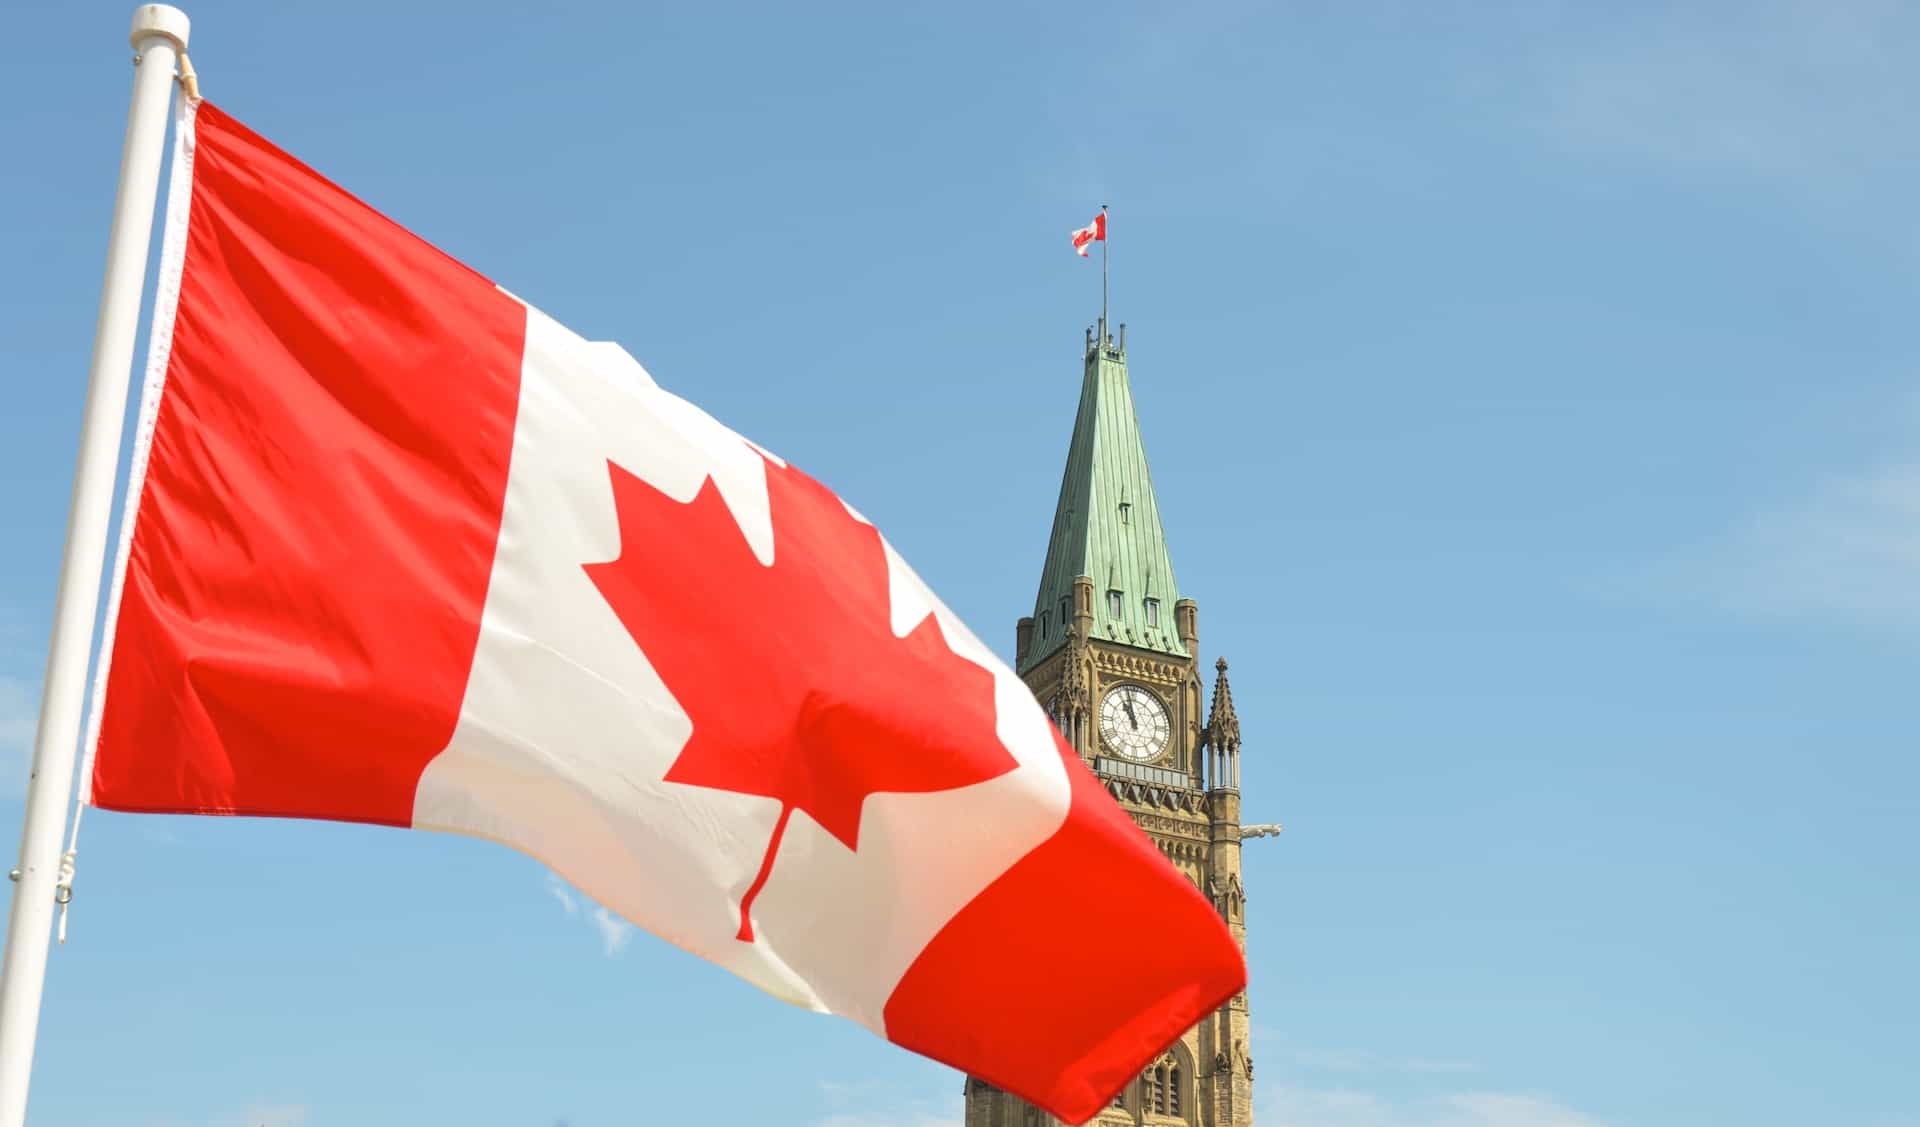 The iconic Canadian flag, with its red and white flowers and Maple Leaf, rustling in the wind in front of the Canadian parliament in the capital city of Ottawa in the province of Ontario.